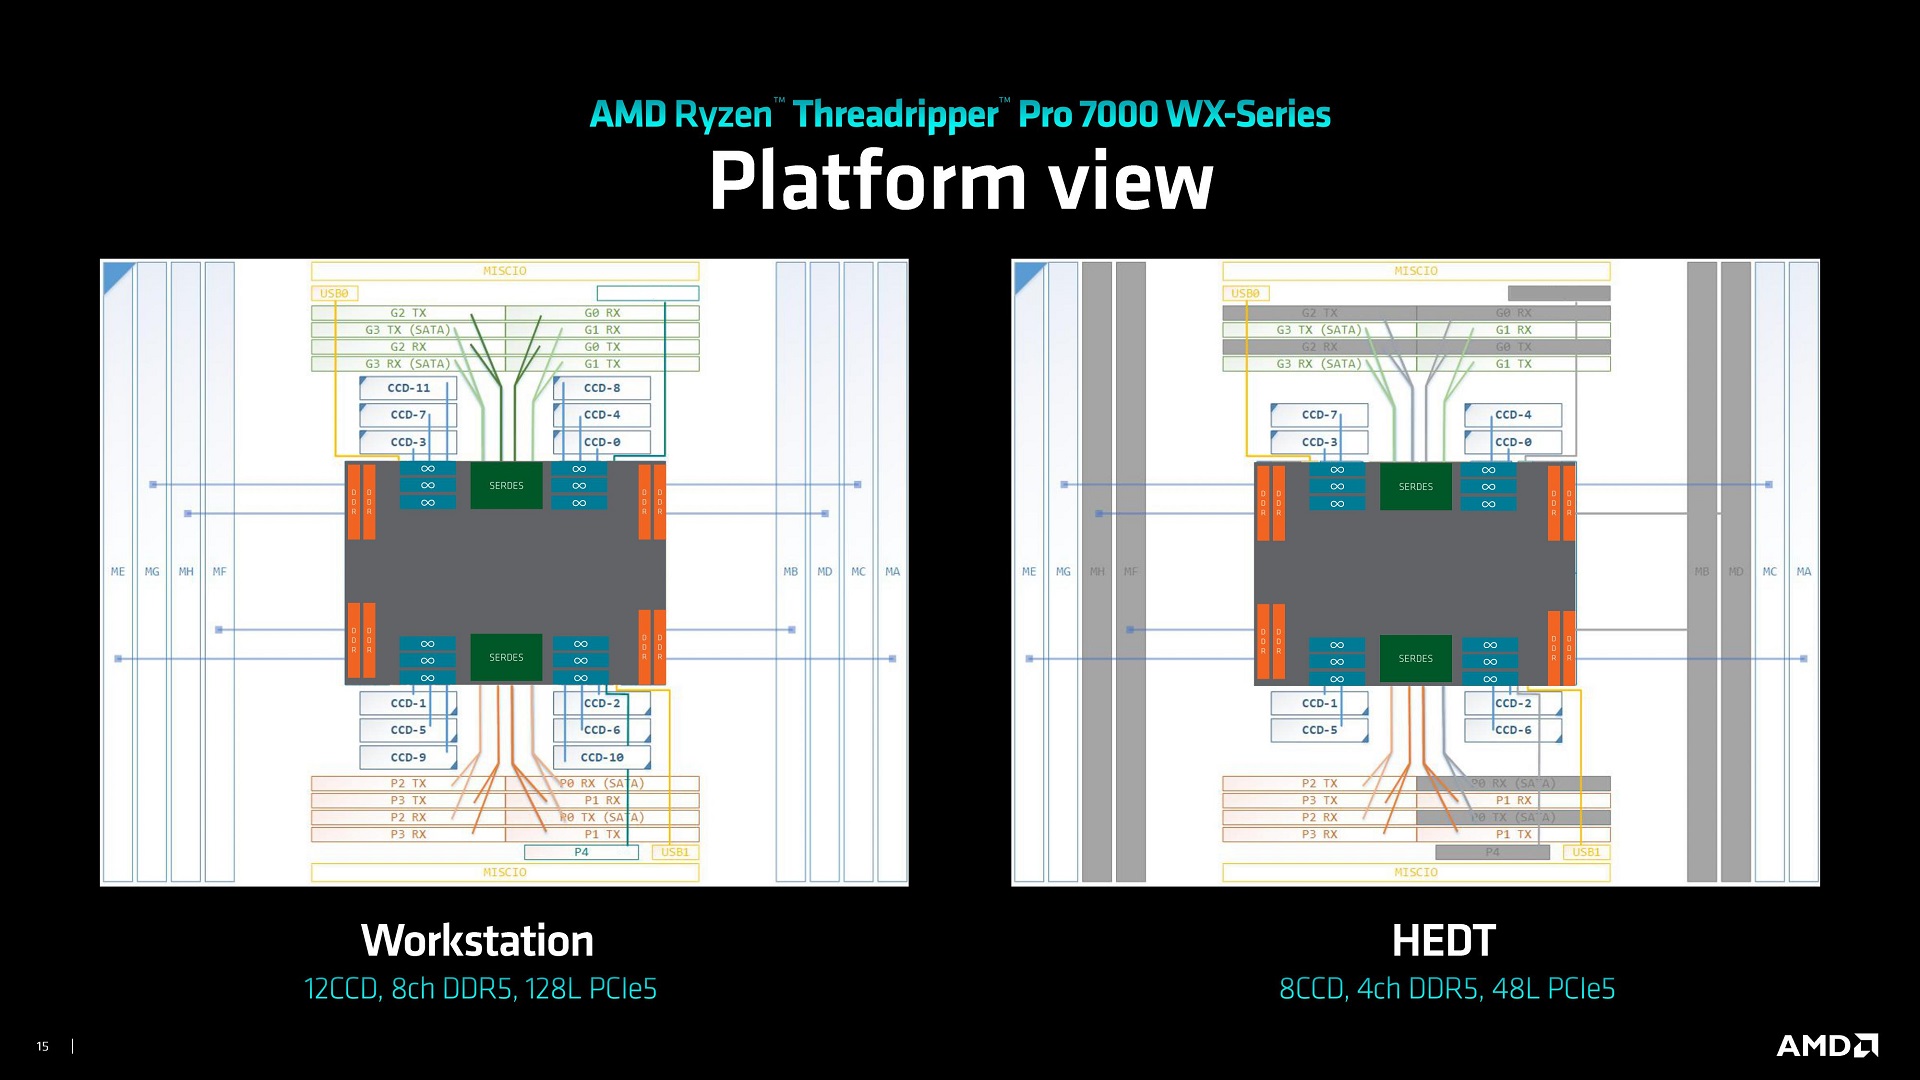 TR 7000 vs. Intel: Science And Simulation - AMD Ryzen Threadripper 7980X &  7970X Review: Revived HEDT Brings More Cores of Zen 4